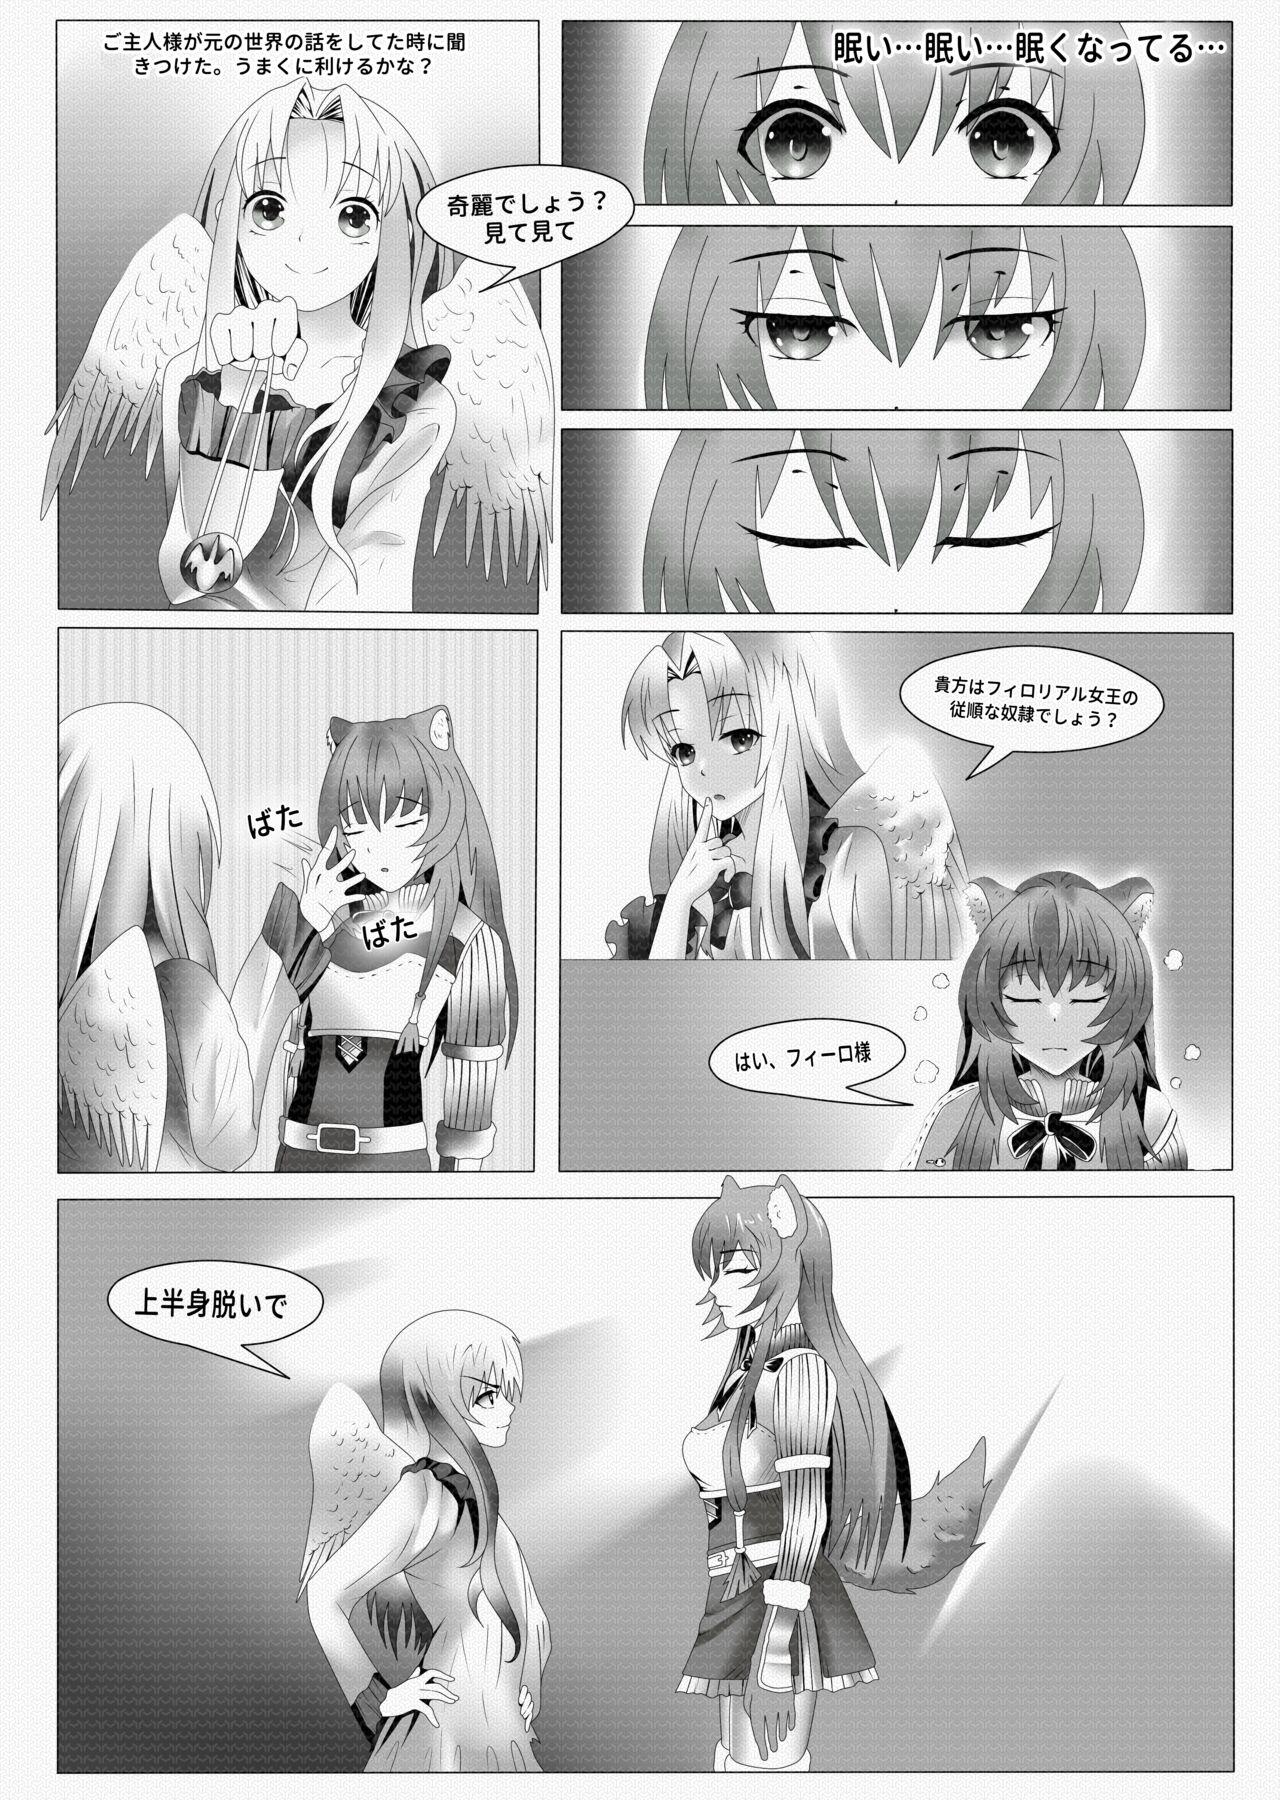 Grande The Rising Of The Shield Hero - Happy Point with My Sister and Teacher - Tate no yuusha no nariagari | the rising of the shield hero Sola - Page 3